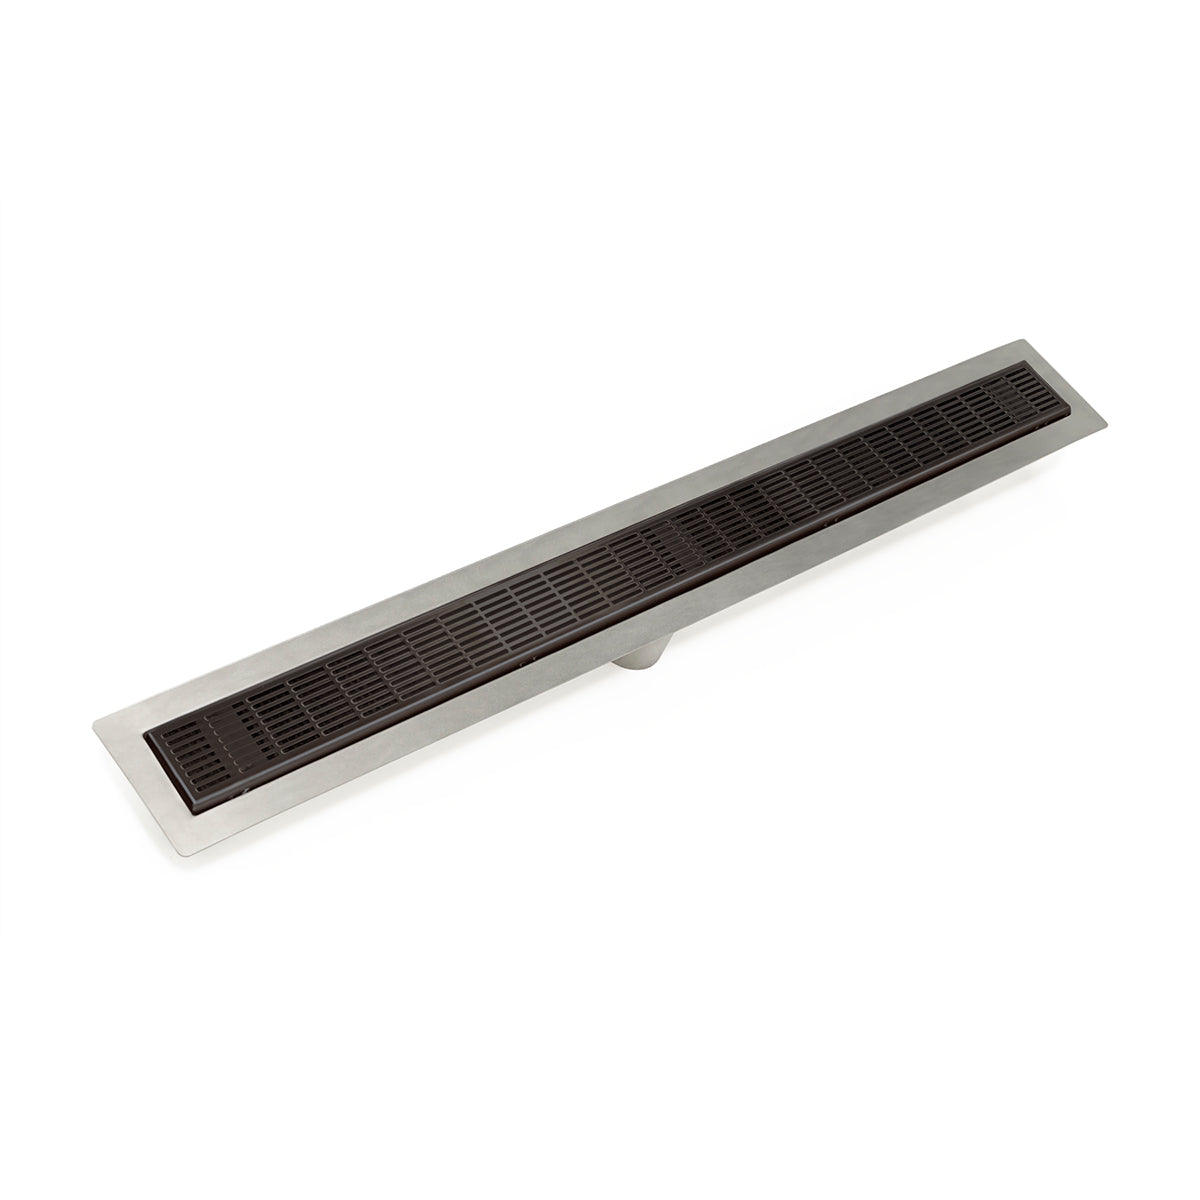 Infinity Drain 36" FF Series Fixed Flange Linear Drain Kit with 2 1/2" Perforated Slotted Grate